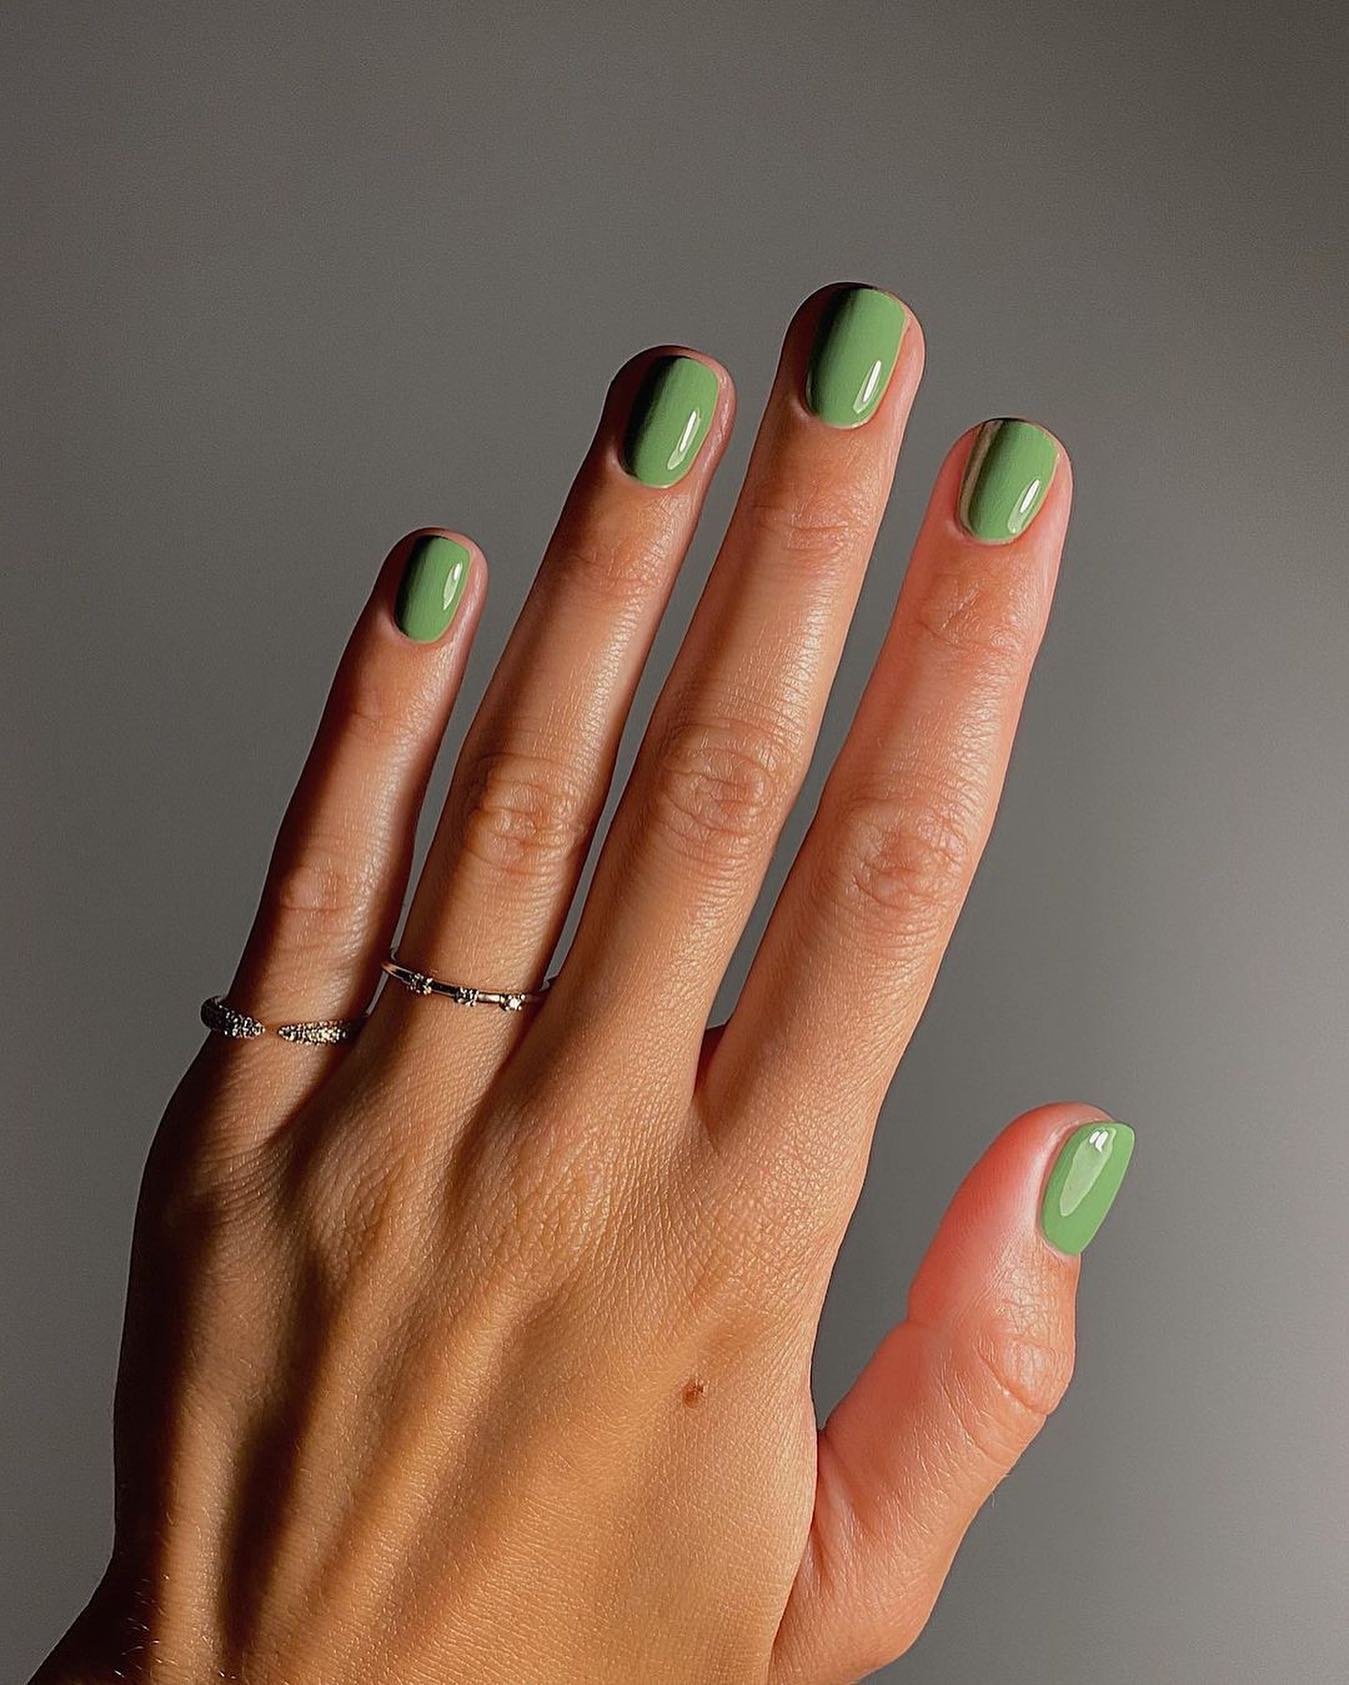 30 - Picture of Green Nails